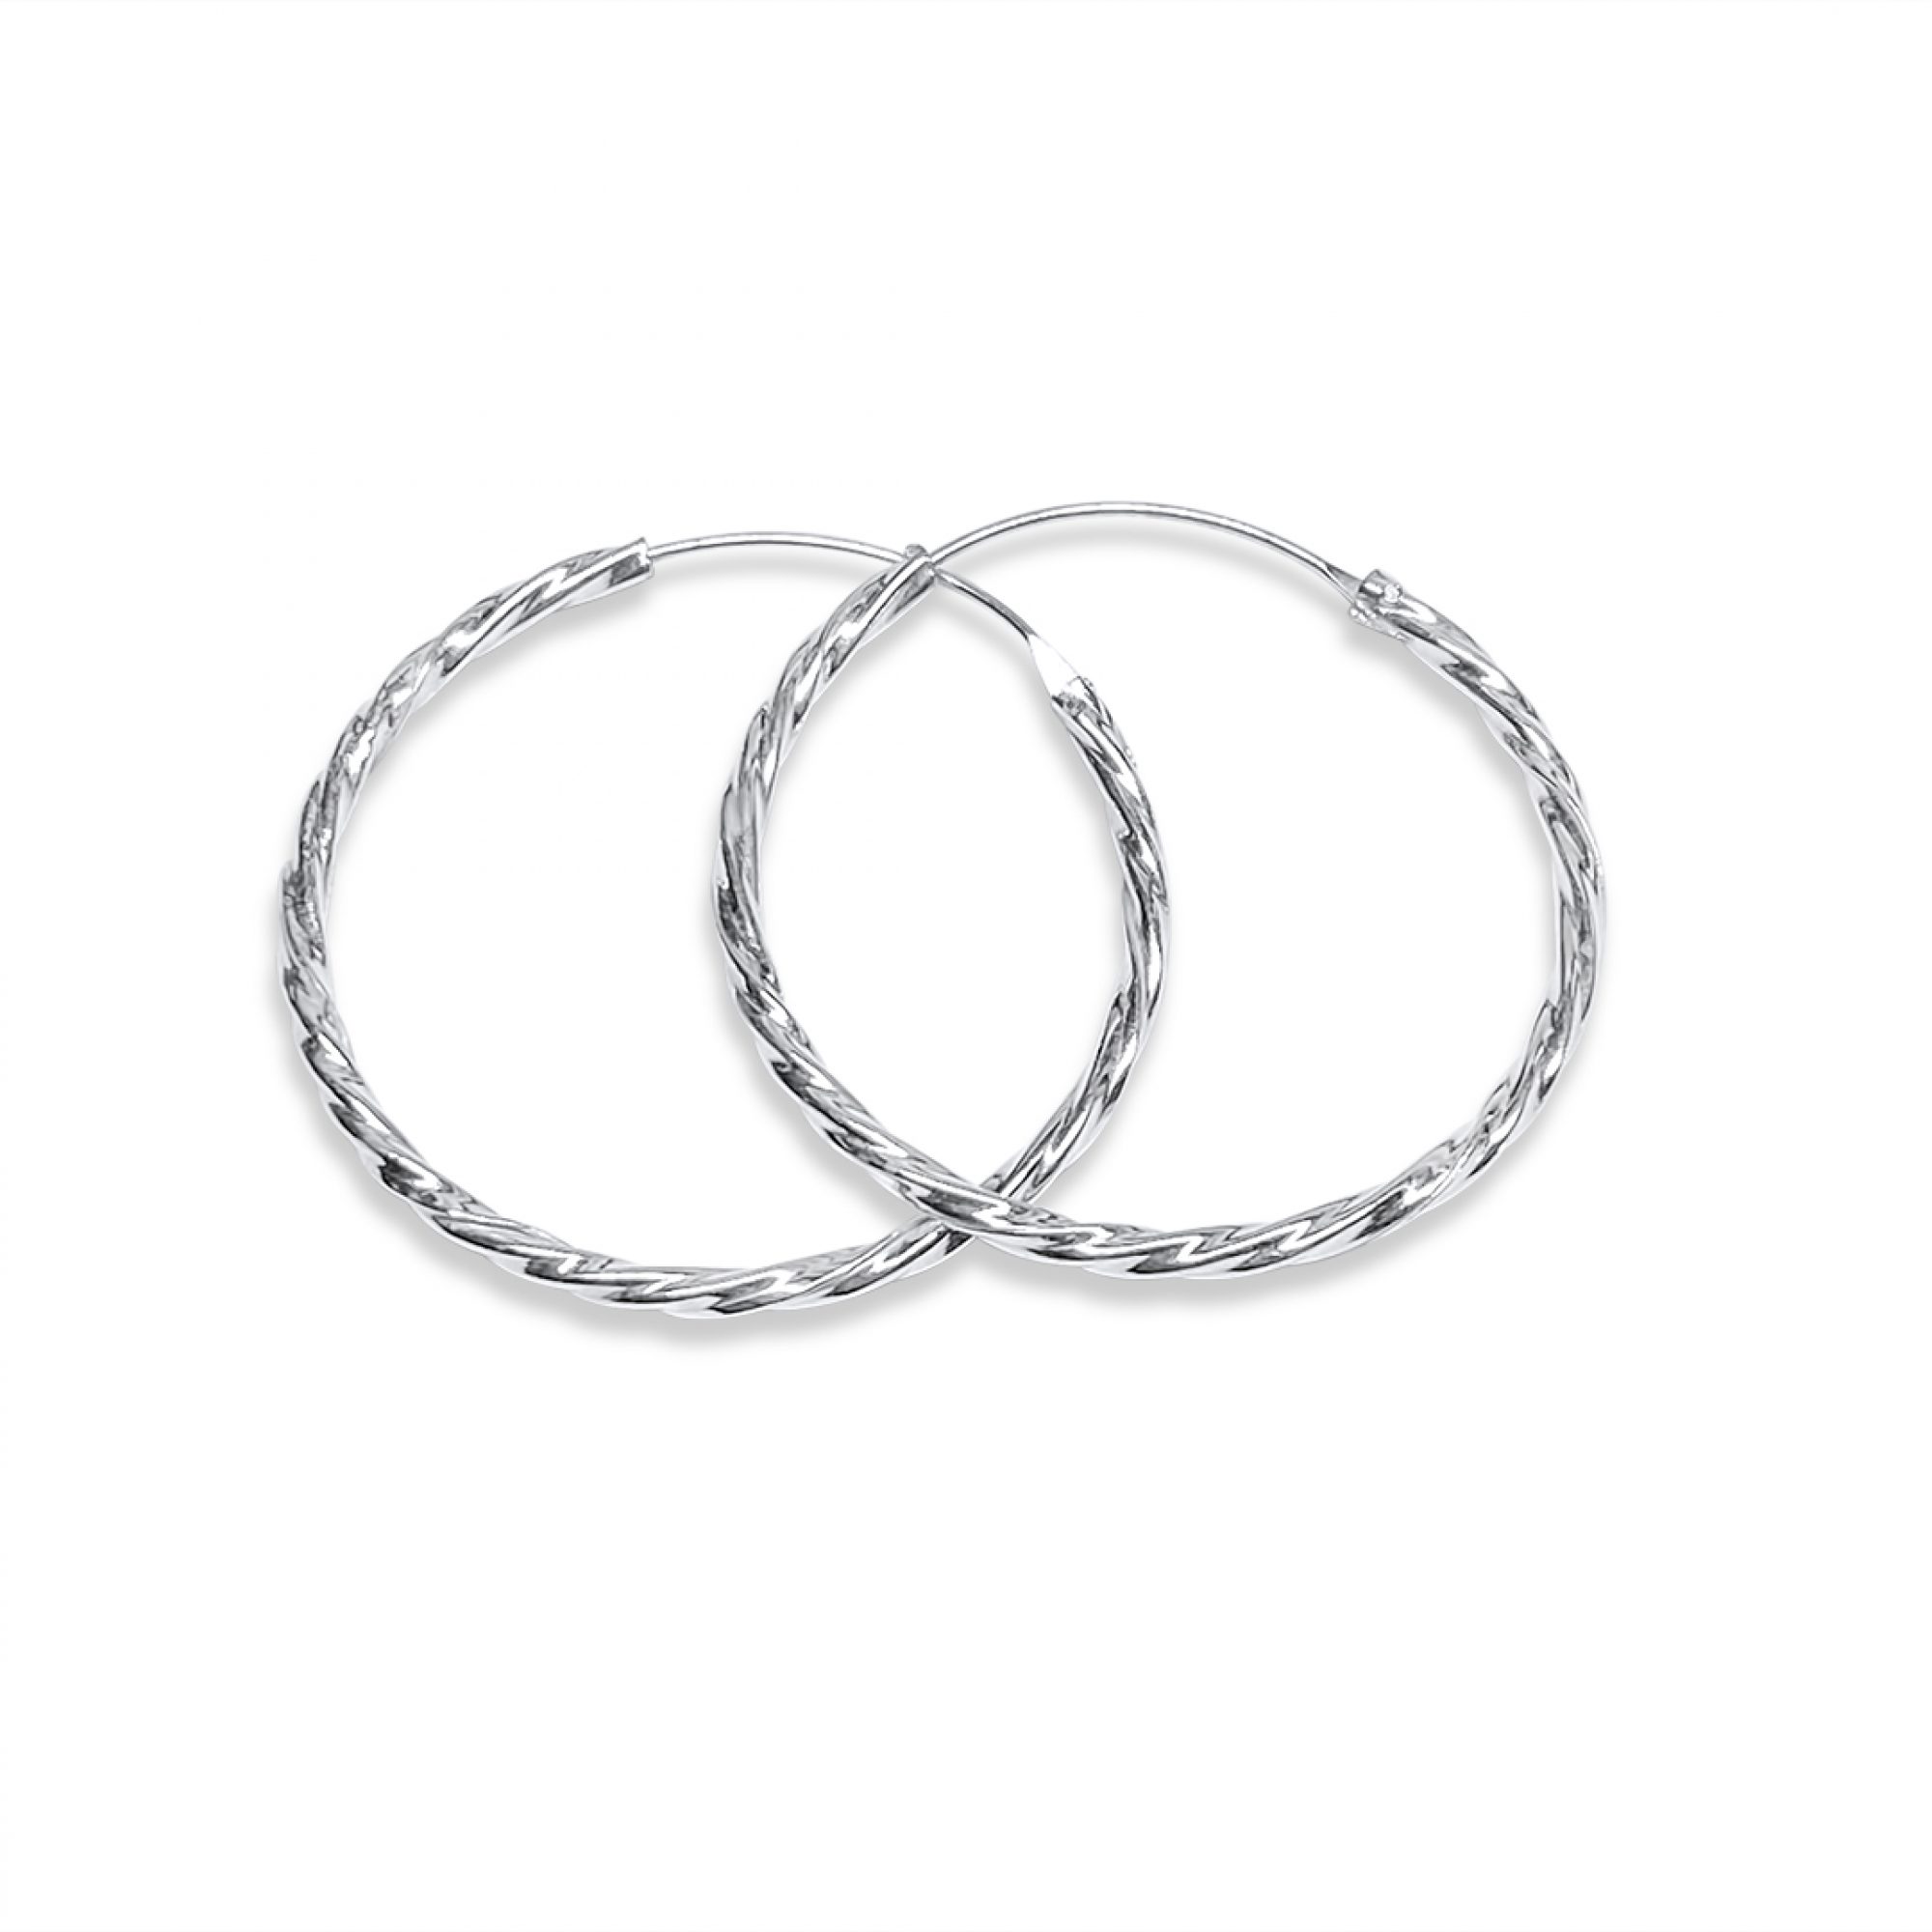 Silver twisted hoops (30mm)